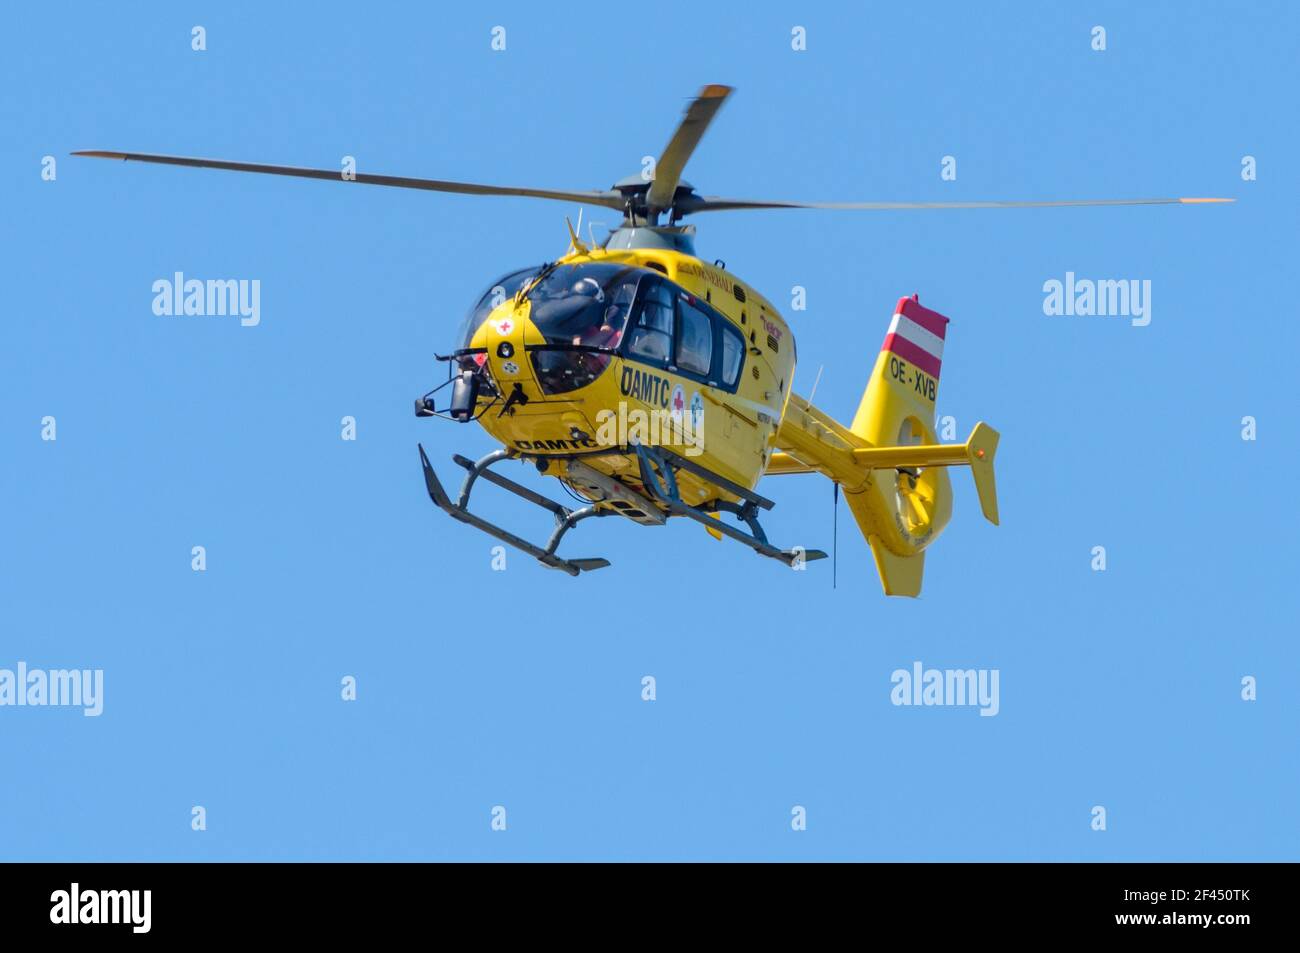 Airbus Helicopters EC 135 T3 operated by Helikopter Air Transport GmbH (Heli Air) OE-XVB, flying in the blue sky Stock Photo